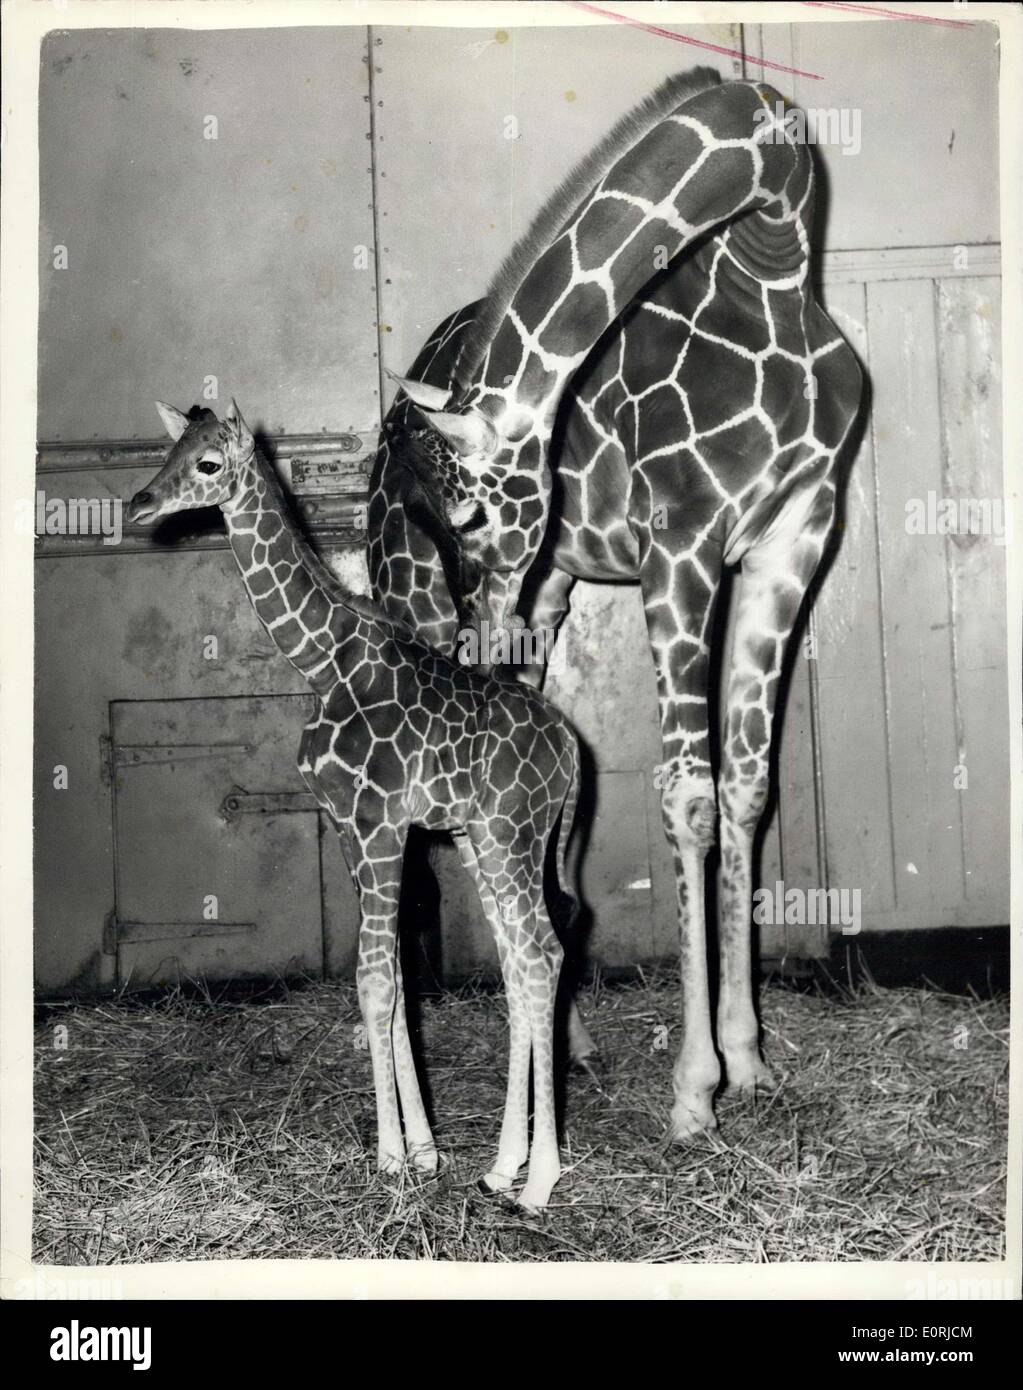 Nov. 16, 1959 - The Zoo's 6Ft. 8 Ins. Baby: The female Giraffe born to ''Grumpy'' and her mate ''Goofy'' on November 1st, was on view at the London Zoo for the first time today. She has been named ''Mary'' by the Head Kasper in charge of Giraffes, Mr. George Robinson, who is a great admirer of Mary Bignall, the athlete who has been chosen sportswoman of the year by the Sport Writers' Association. At birth ''Mary'' stood six foot two inches and she is growing fast: she now measures 6' 8''. Photo shows ''Mary'', the baby giraffe pictured at the Zoo today with her mother ''Grumpy' Stock Photo